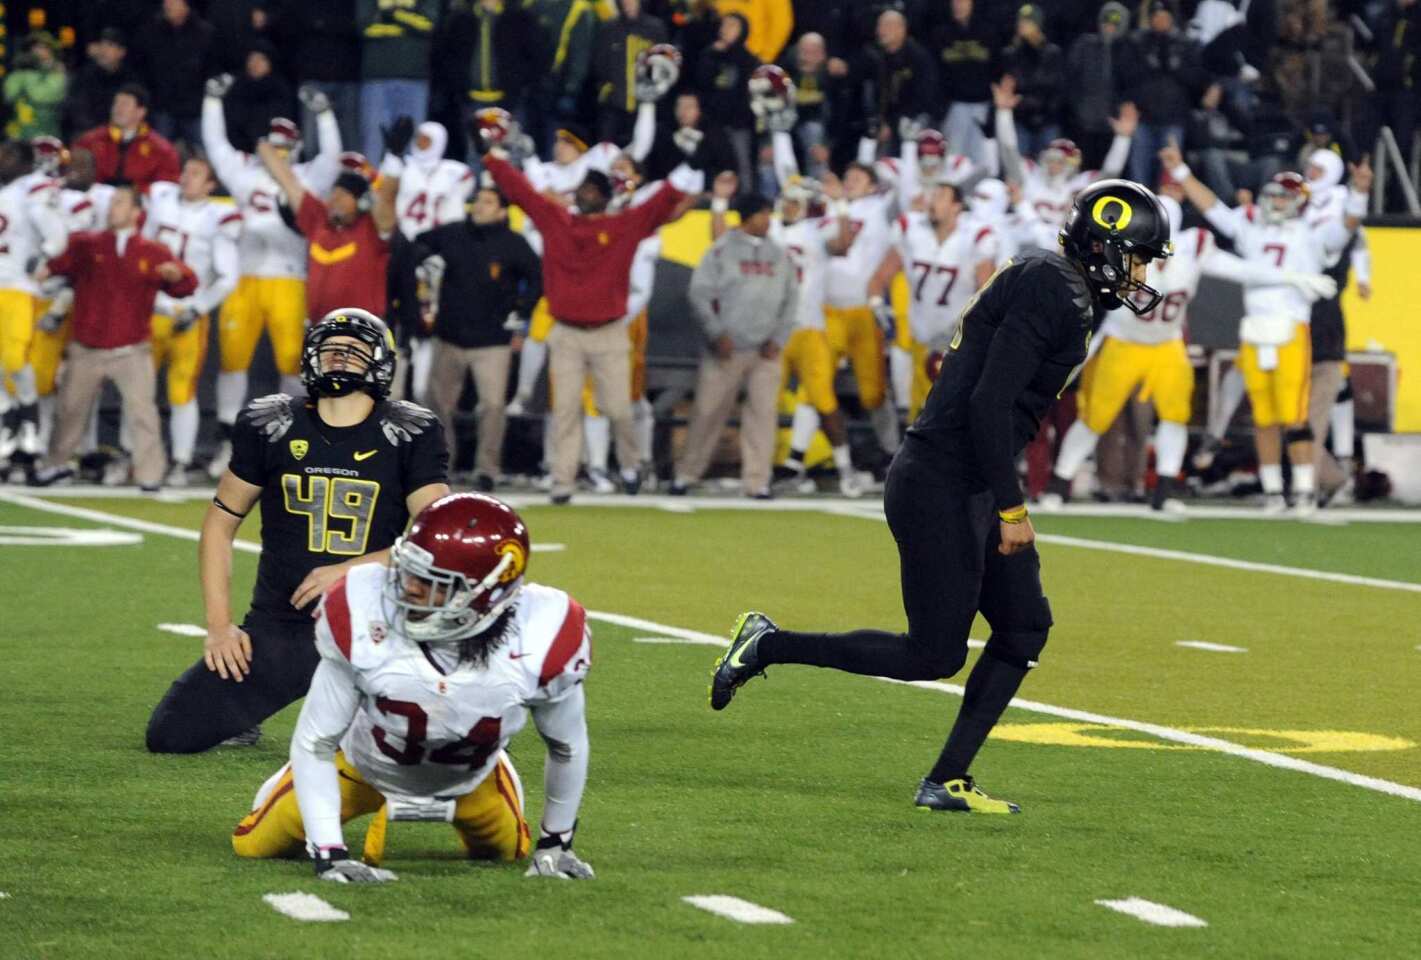 Oregon holder Jackson Rice (49) reacts, as well as the USC sideline in the background, after kicker Alejandro Maldonado missed a field-goal attempt that could have tied the score as time expired on Saturday at Autzen Stadium, giving the Trojans a 38-35 victory.